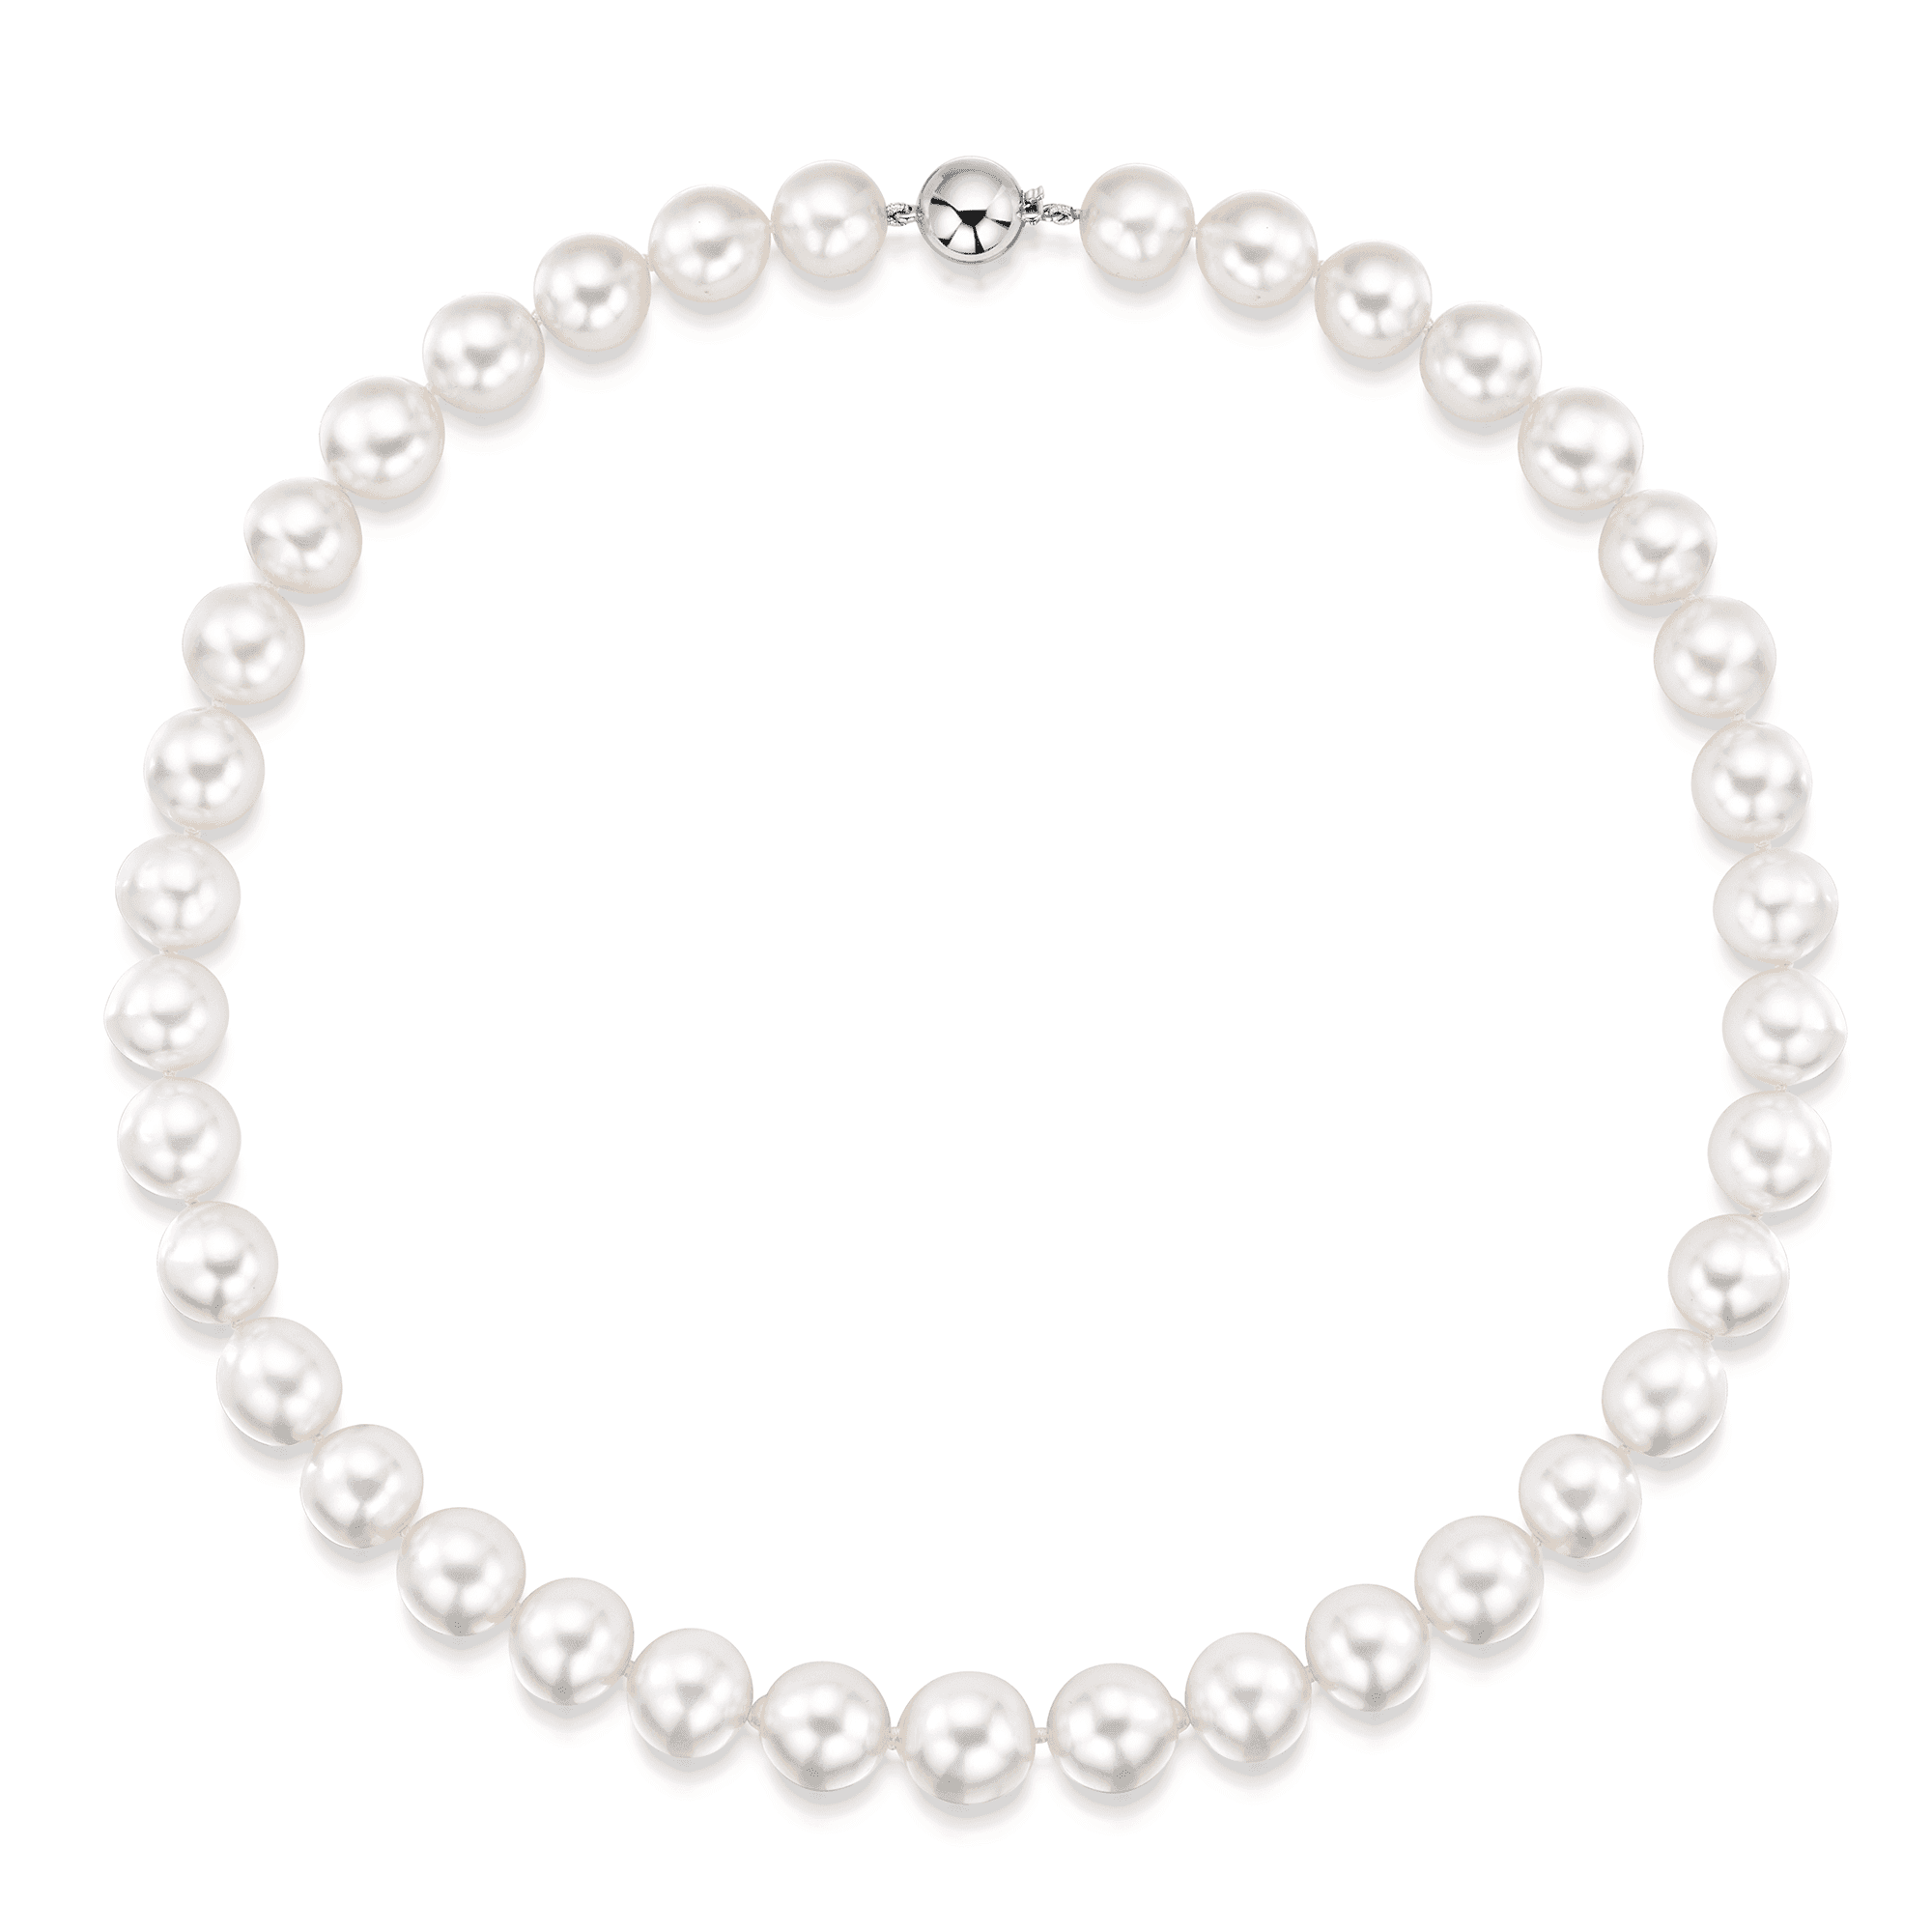 South Sea Graduated Pearl Necklet with 18ct White Gold Ball Clasp